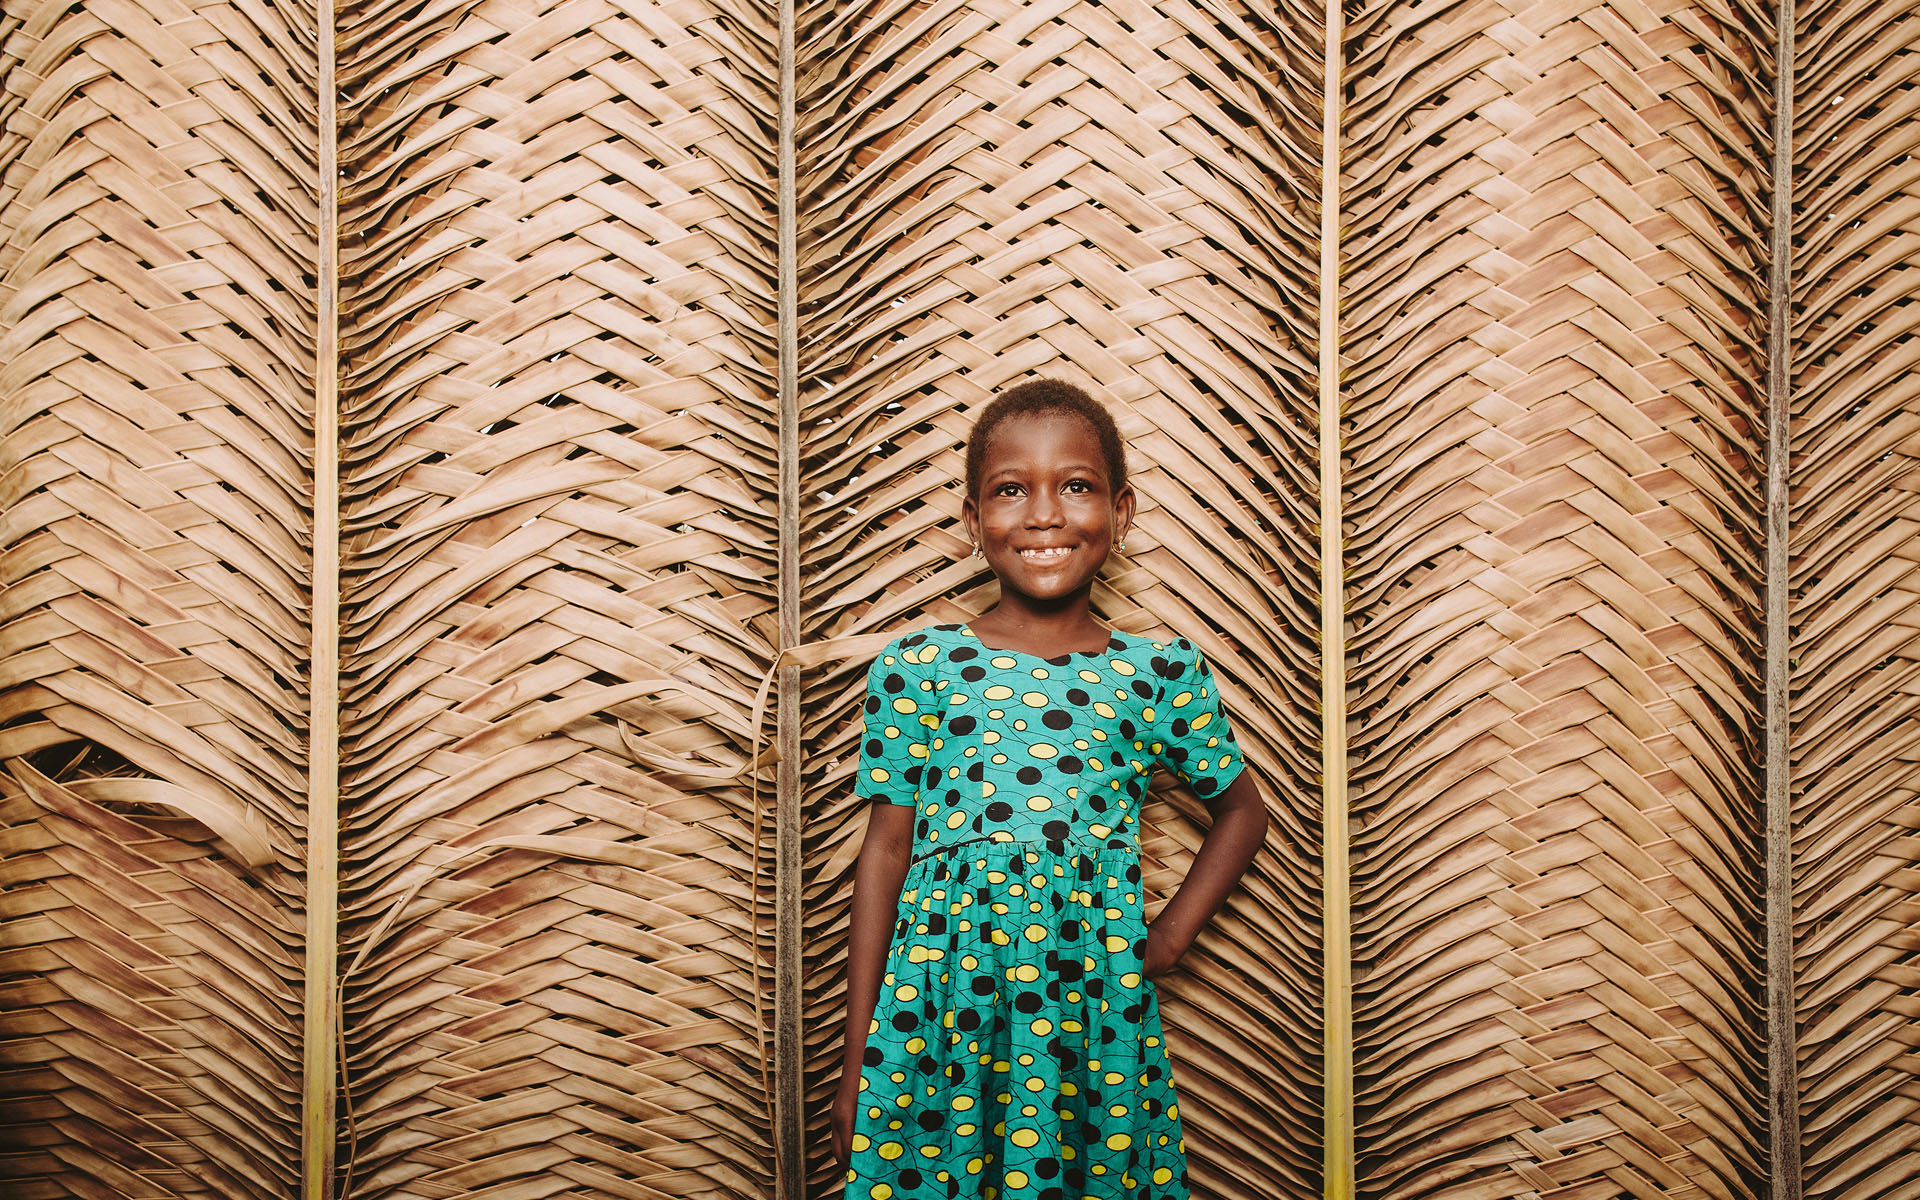 A girl in Togo wearing a green dress stands in front of a wall.